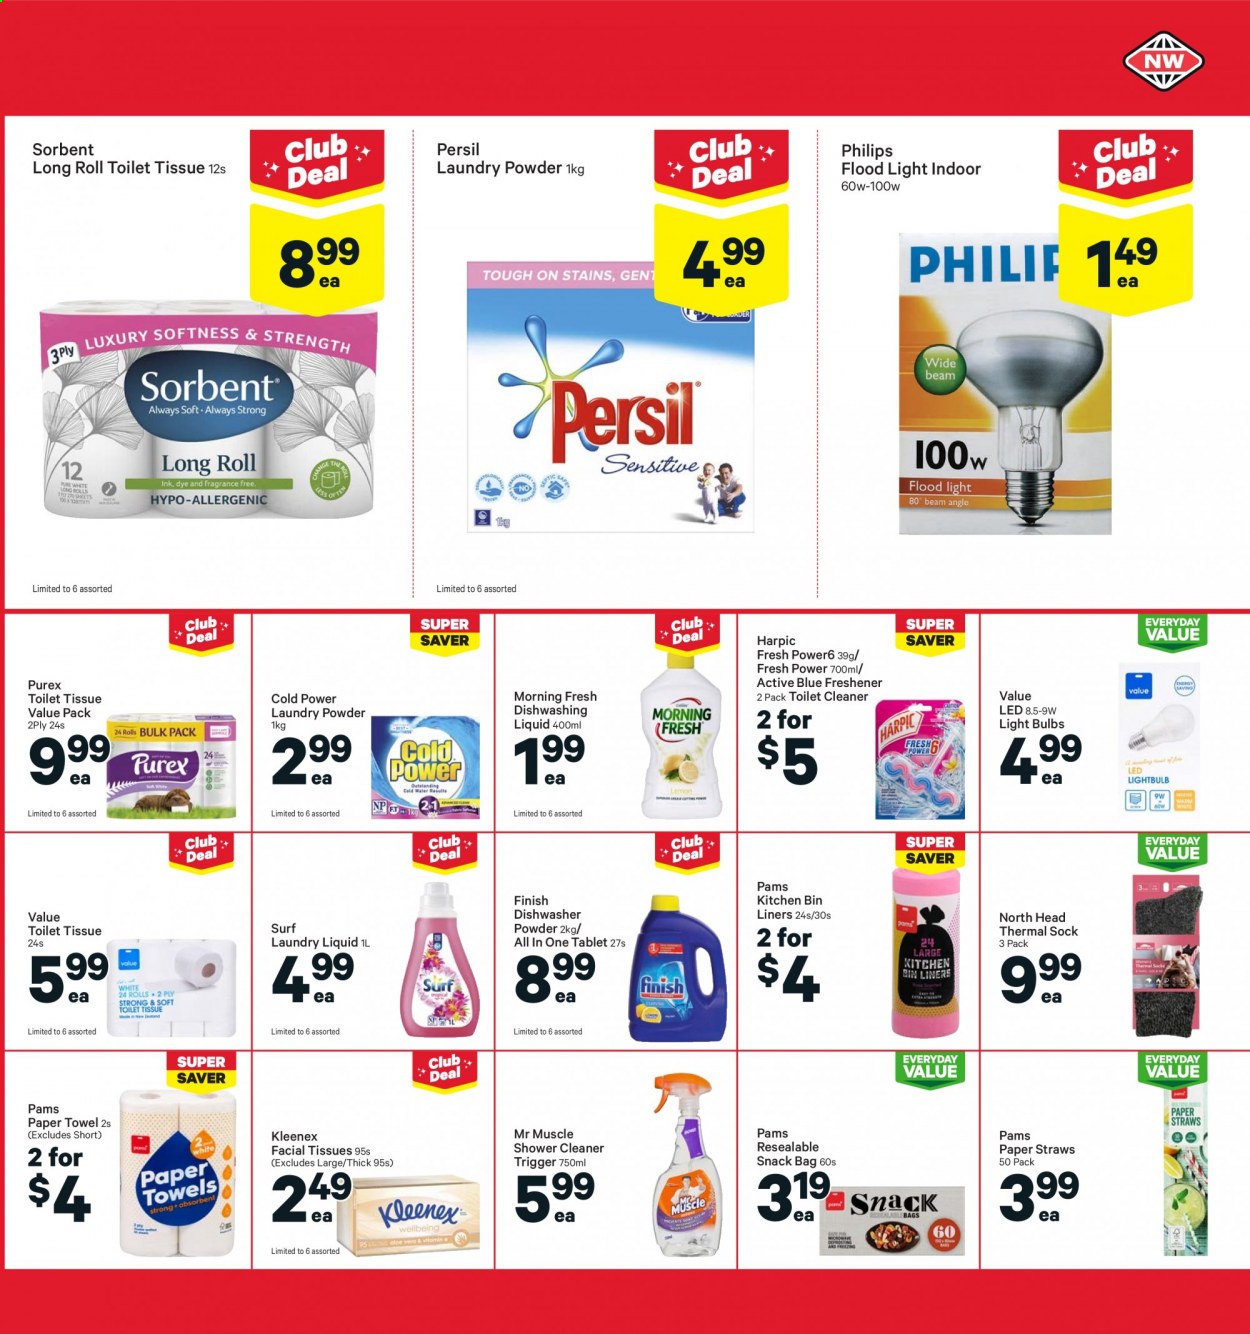 thumbnail - New World mailer - 09.08.2021 - 15.08.2021 - Sales products - Kleenex, toilet paper, paper towels, facial tissues. Page 27.